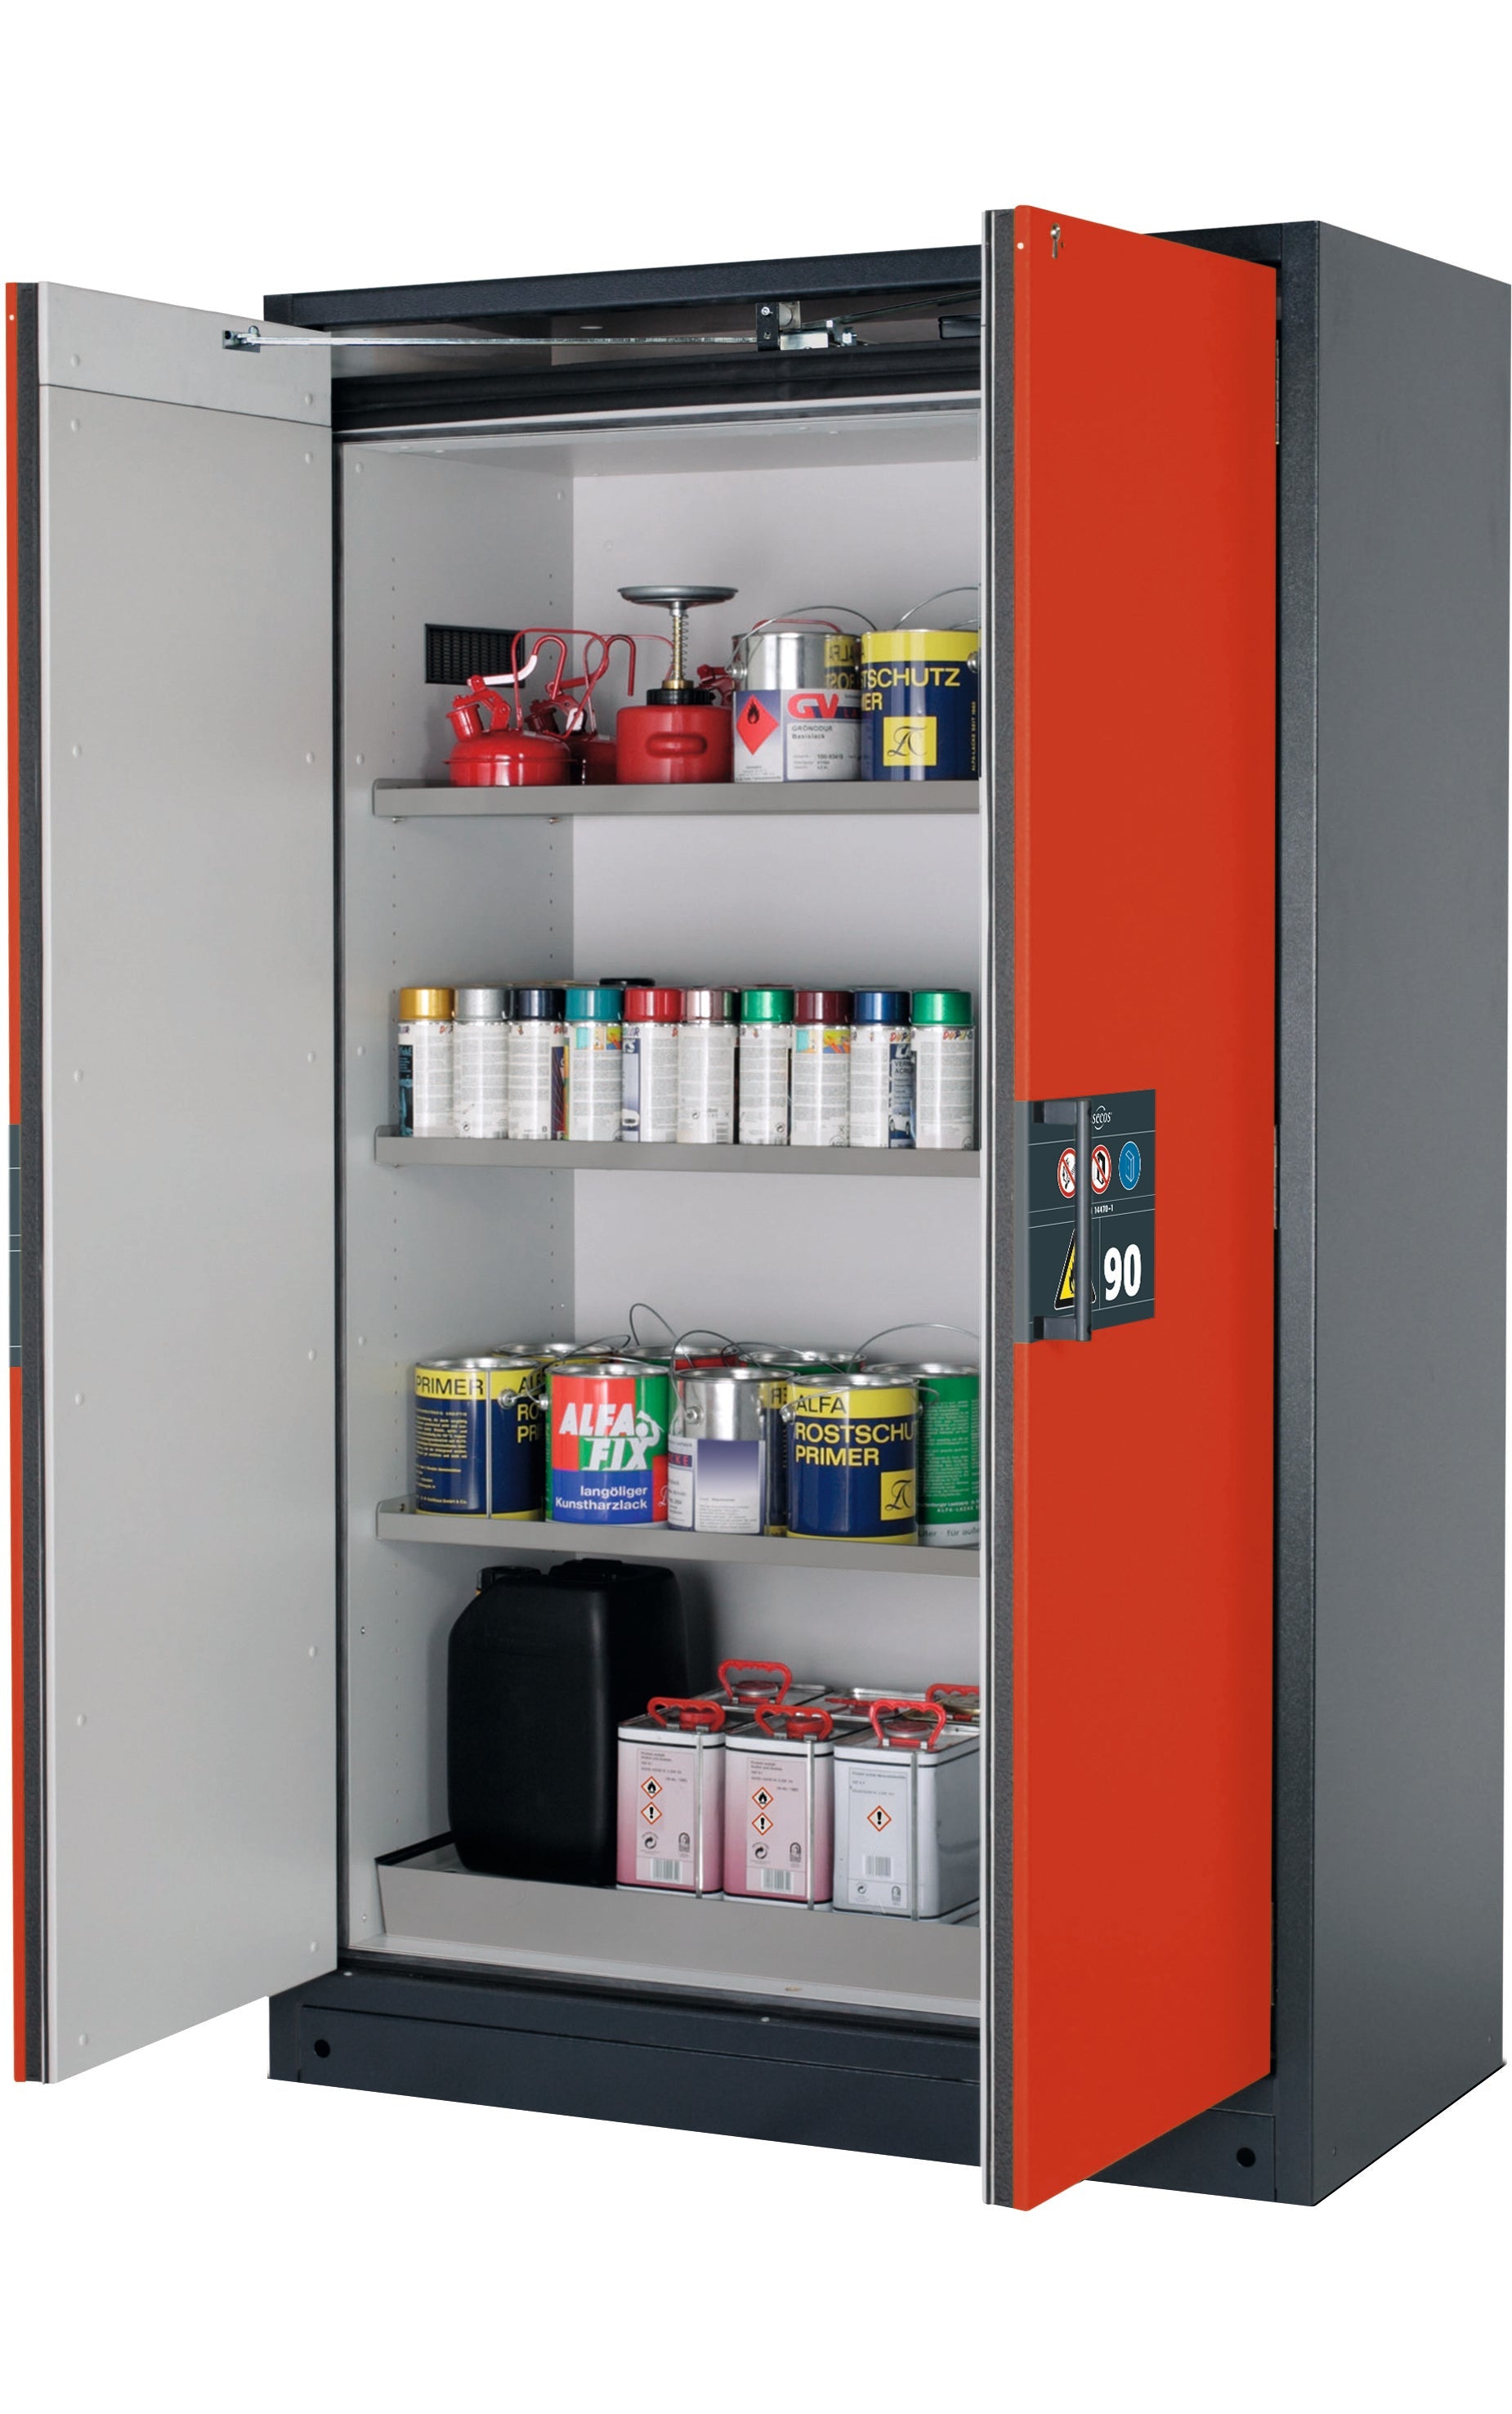 Type 90 safety storage cabinet Q-PEGASUS-90 model Q90.195.120.WDAC in traffic red RAL 3020 with 3x shelf standard (stainless steel 1.4301),